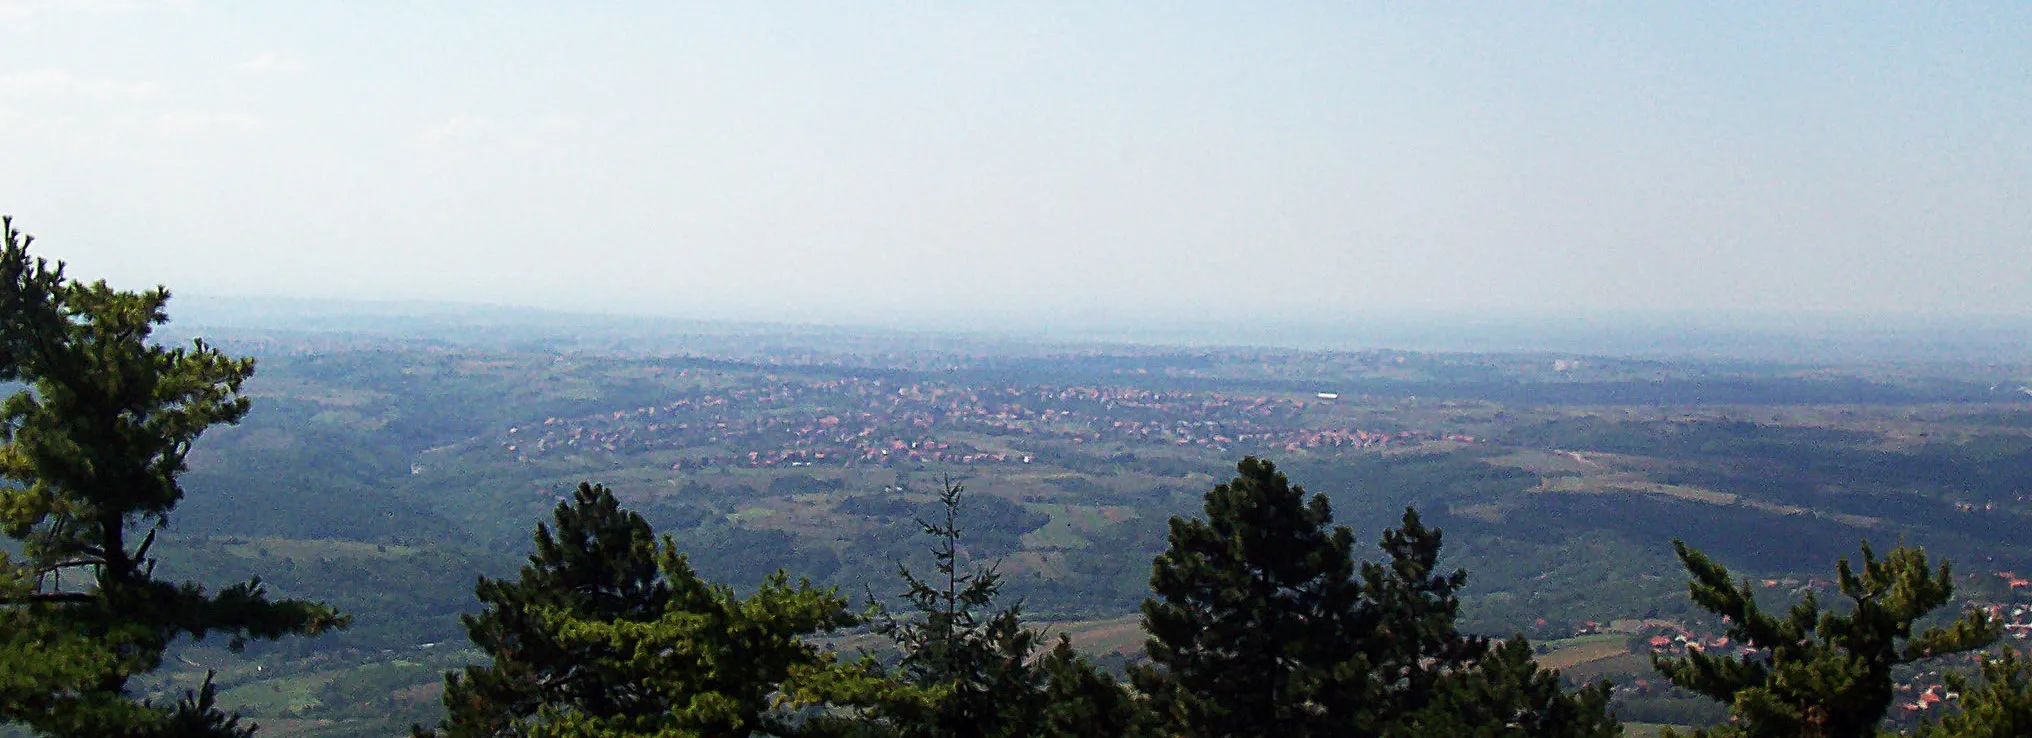 Photo showing: Rušanj, photographed from a peak of Avala.